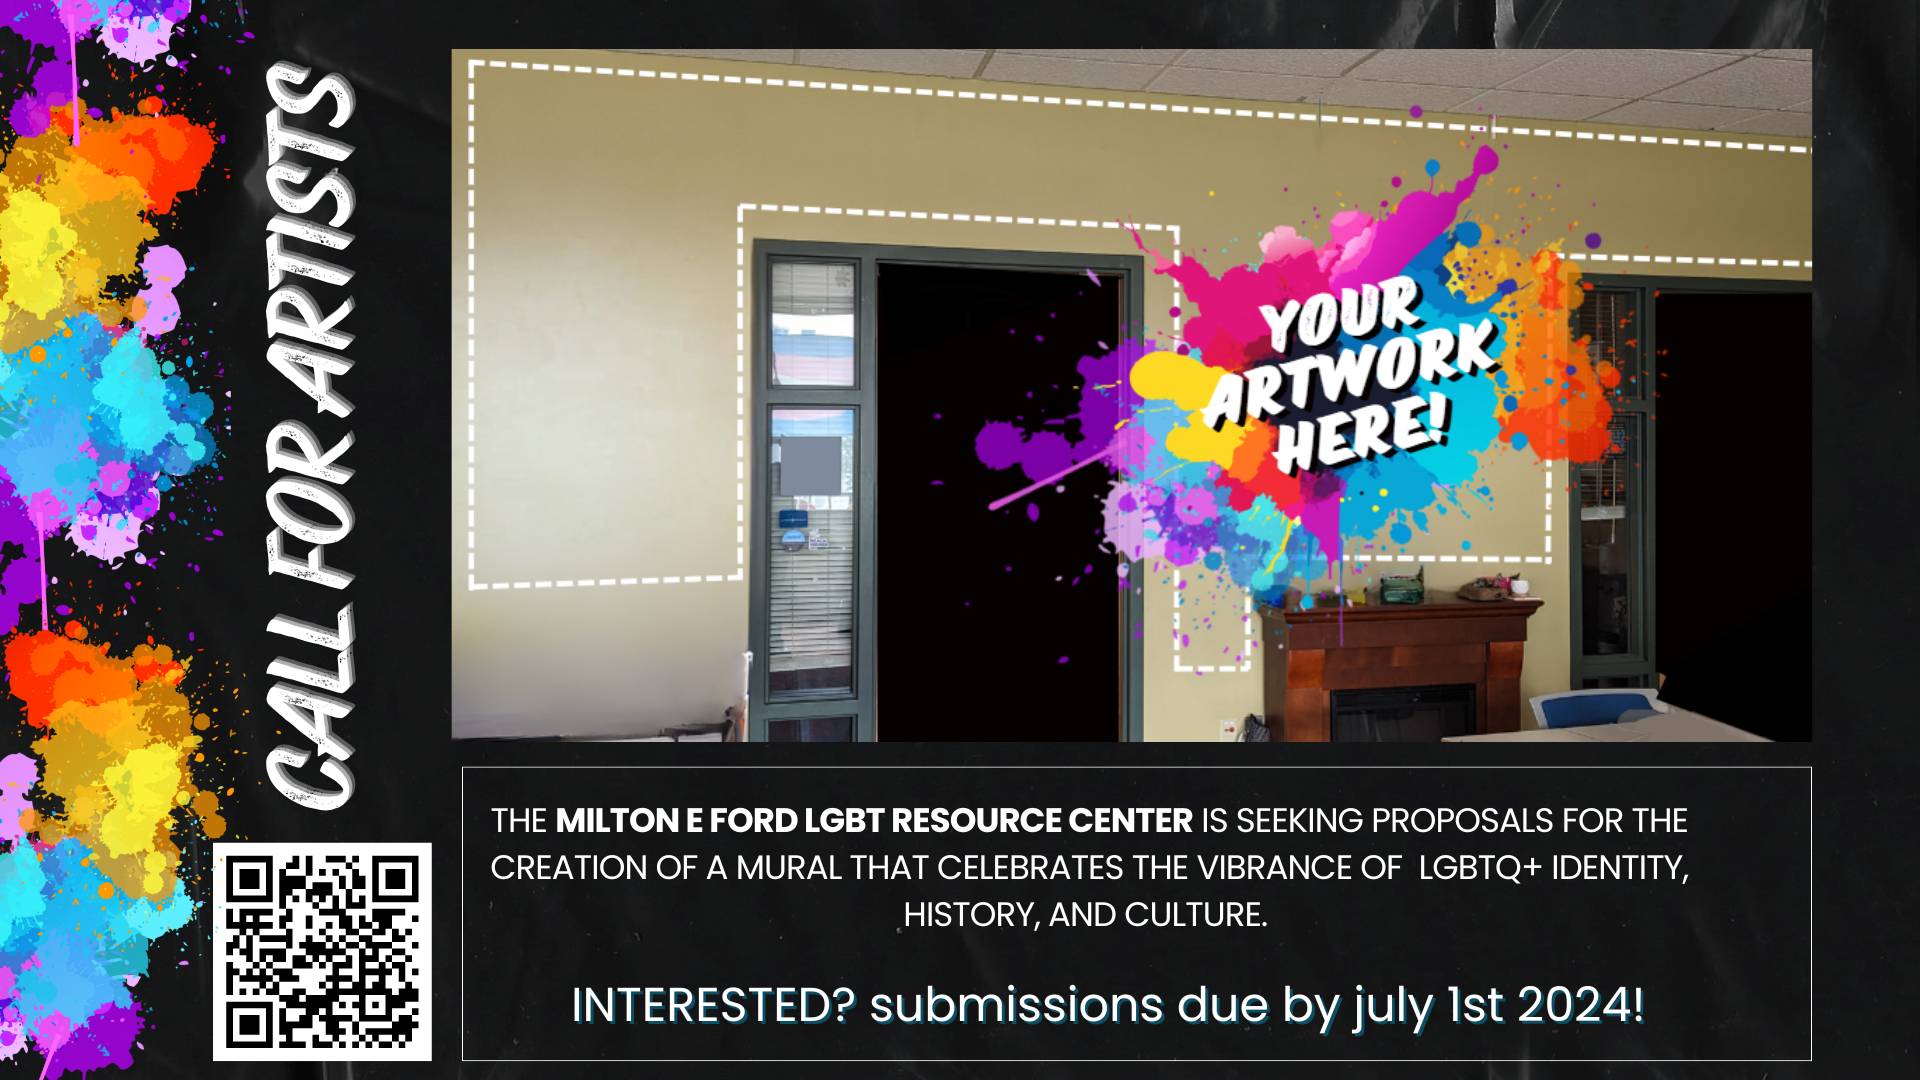 The LGBTRC is commissioning a mural! Submit your proposal today - due July 1